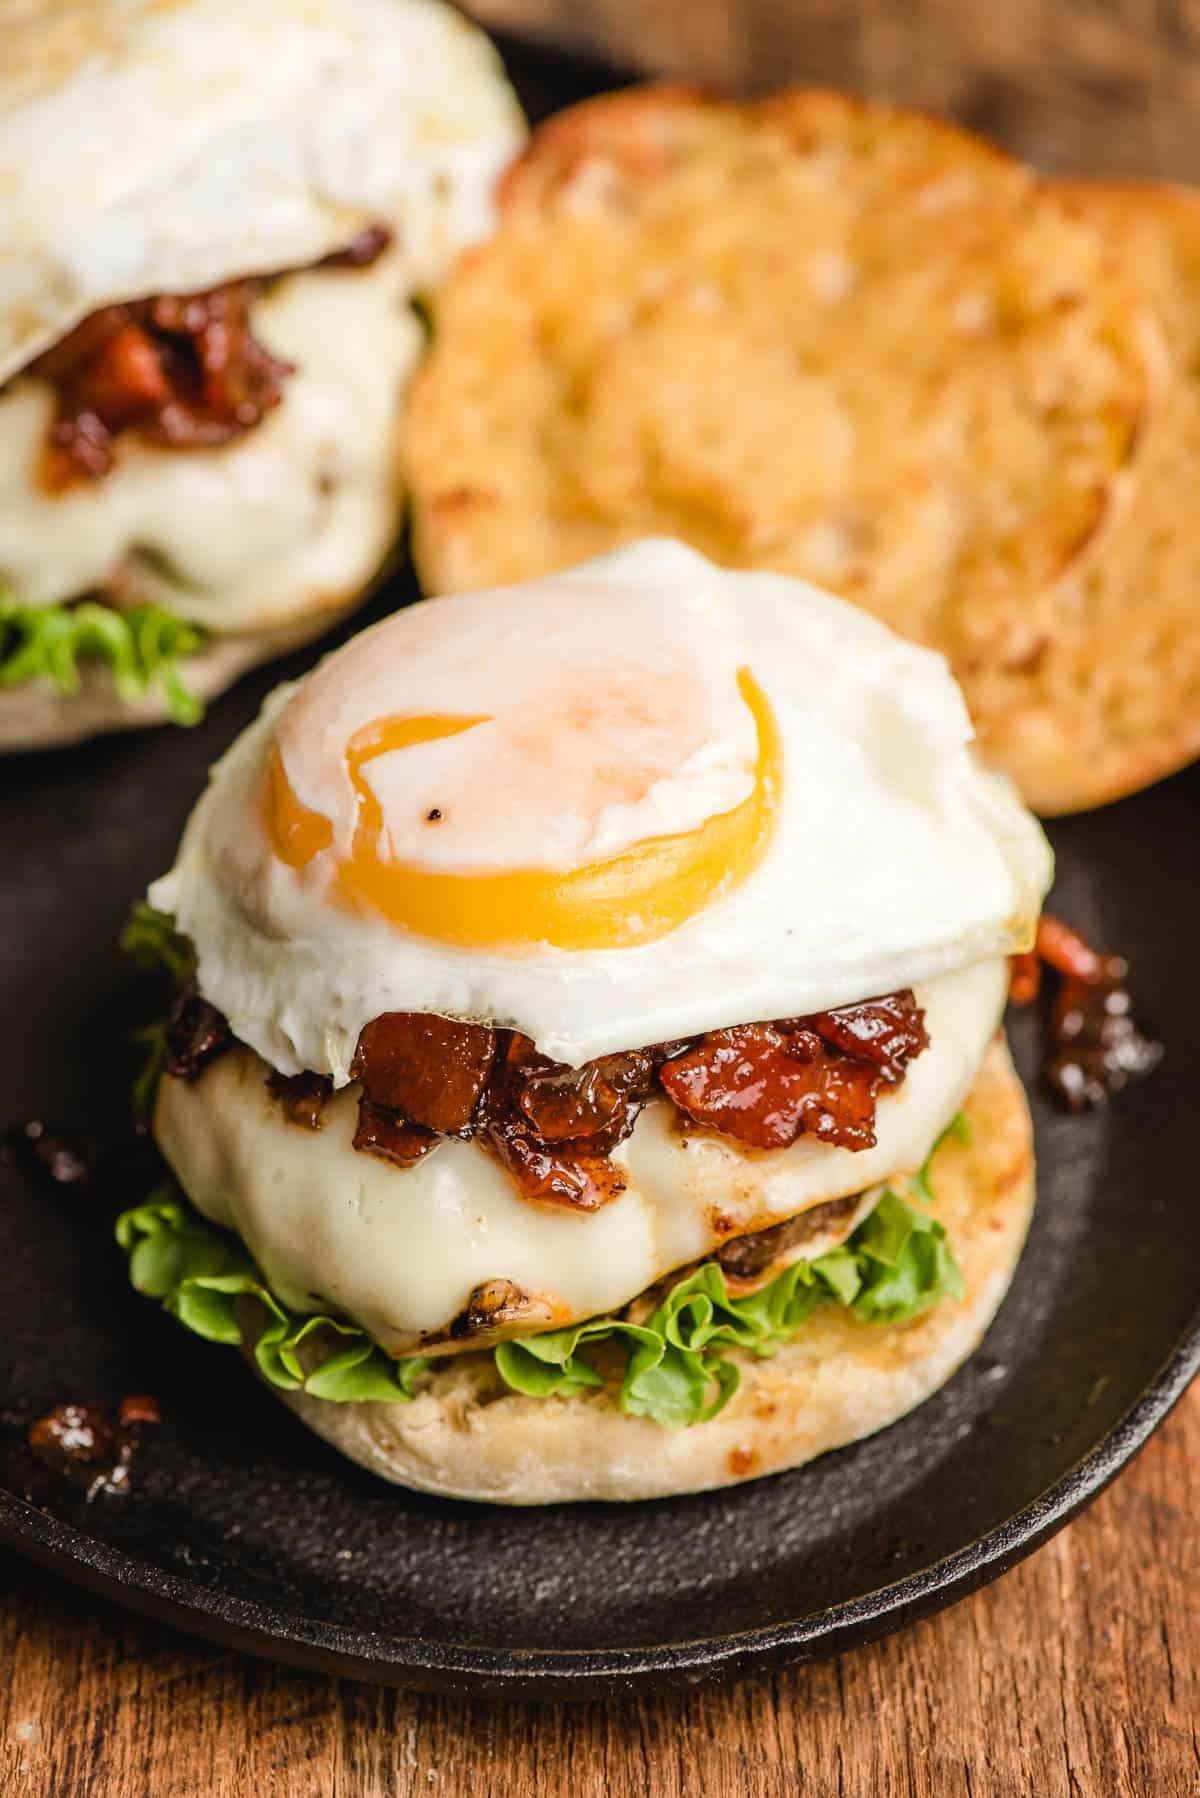 Fried egg burger with bacon jam and lettuce on an English muffin.